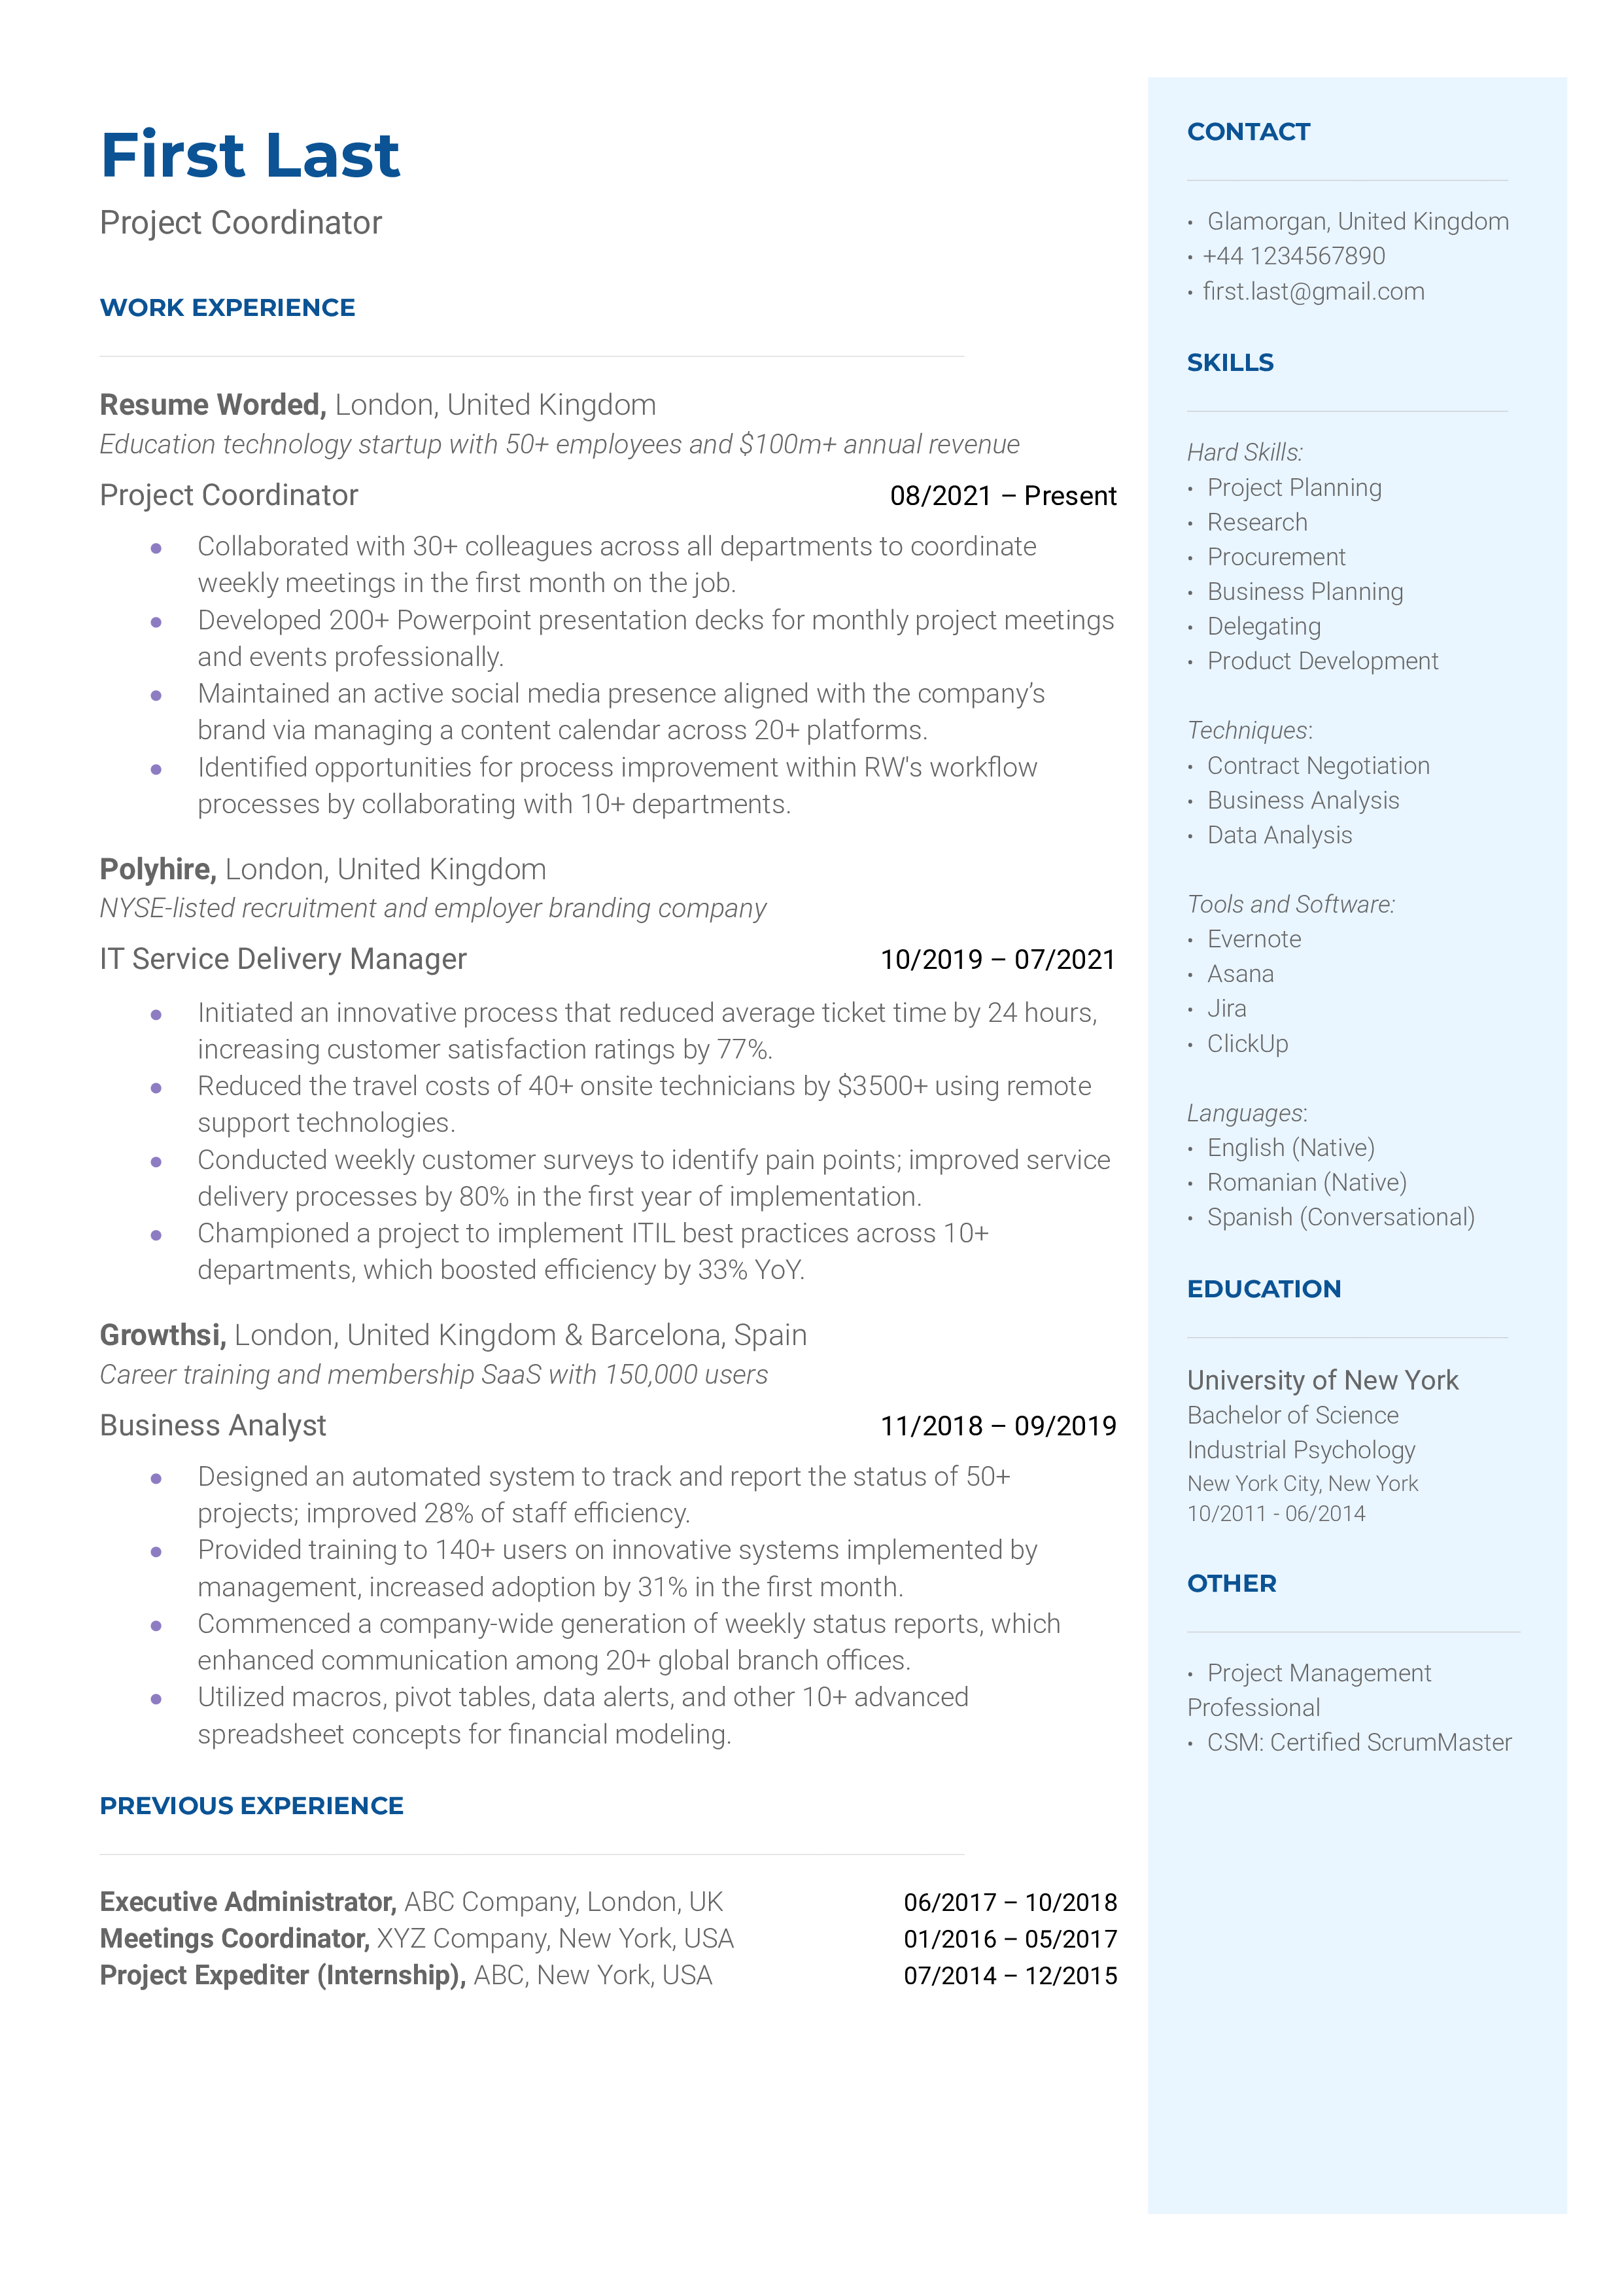 Screengrab of a Project Coordinator CV, showcasing software skills and remote work experience.